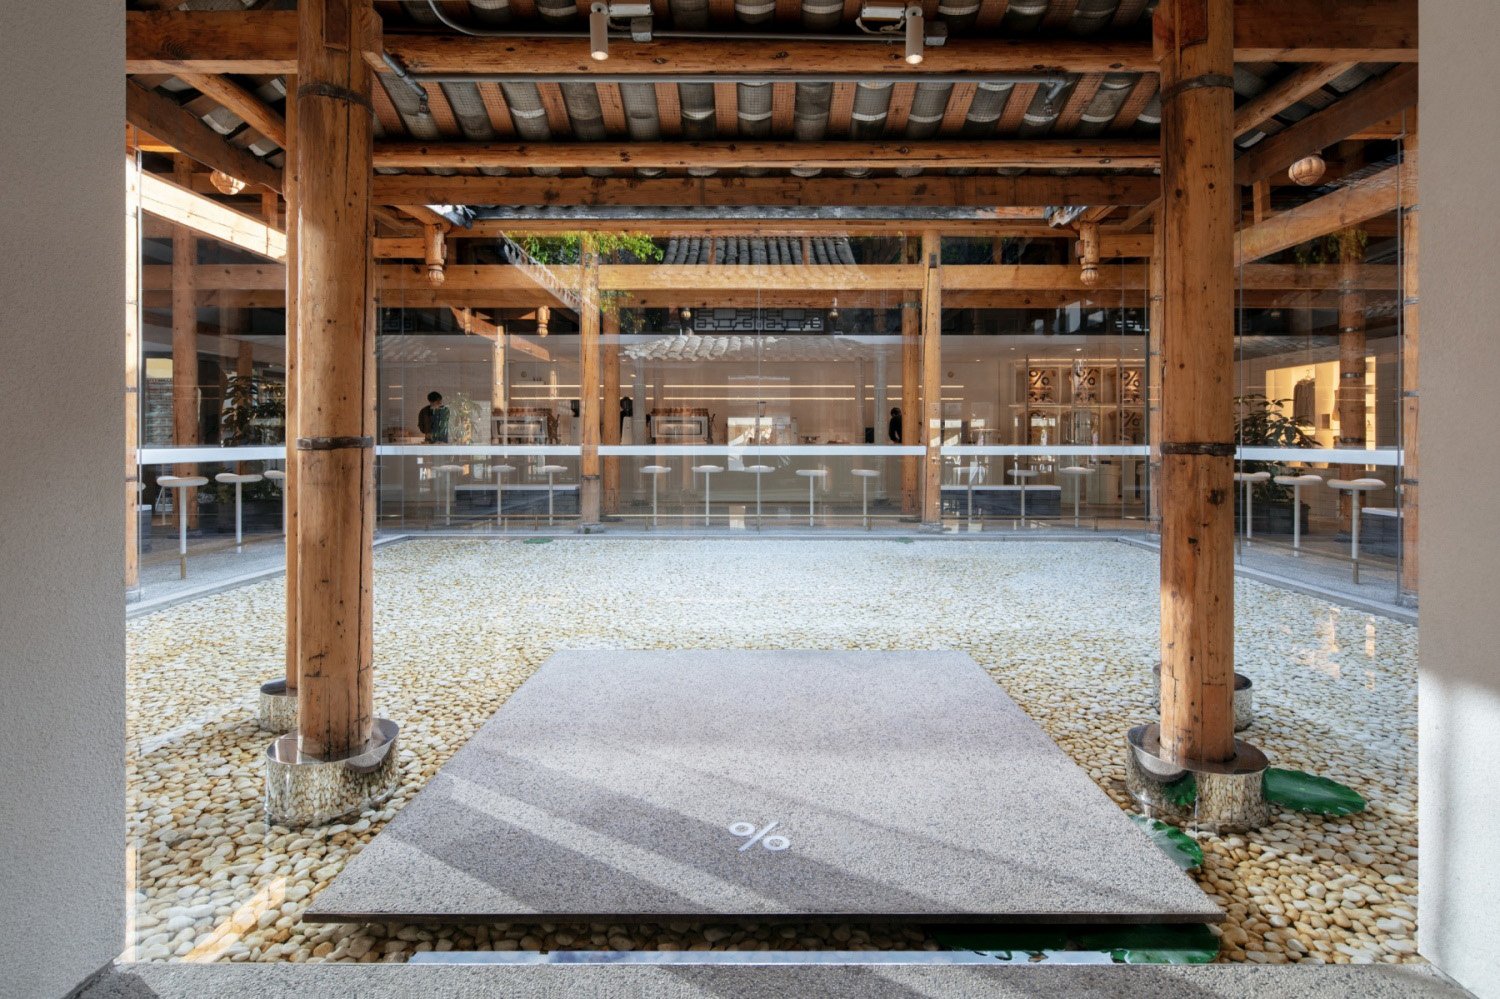 The entire courtyard has been transformed into a simple and modern white pool | Zhi Xia